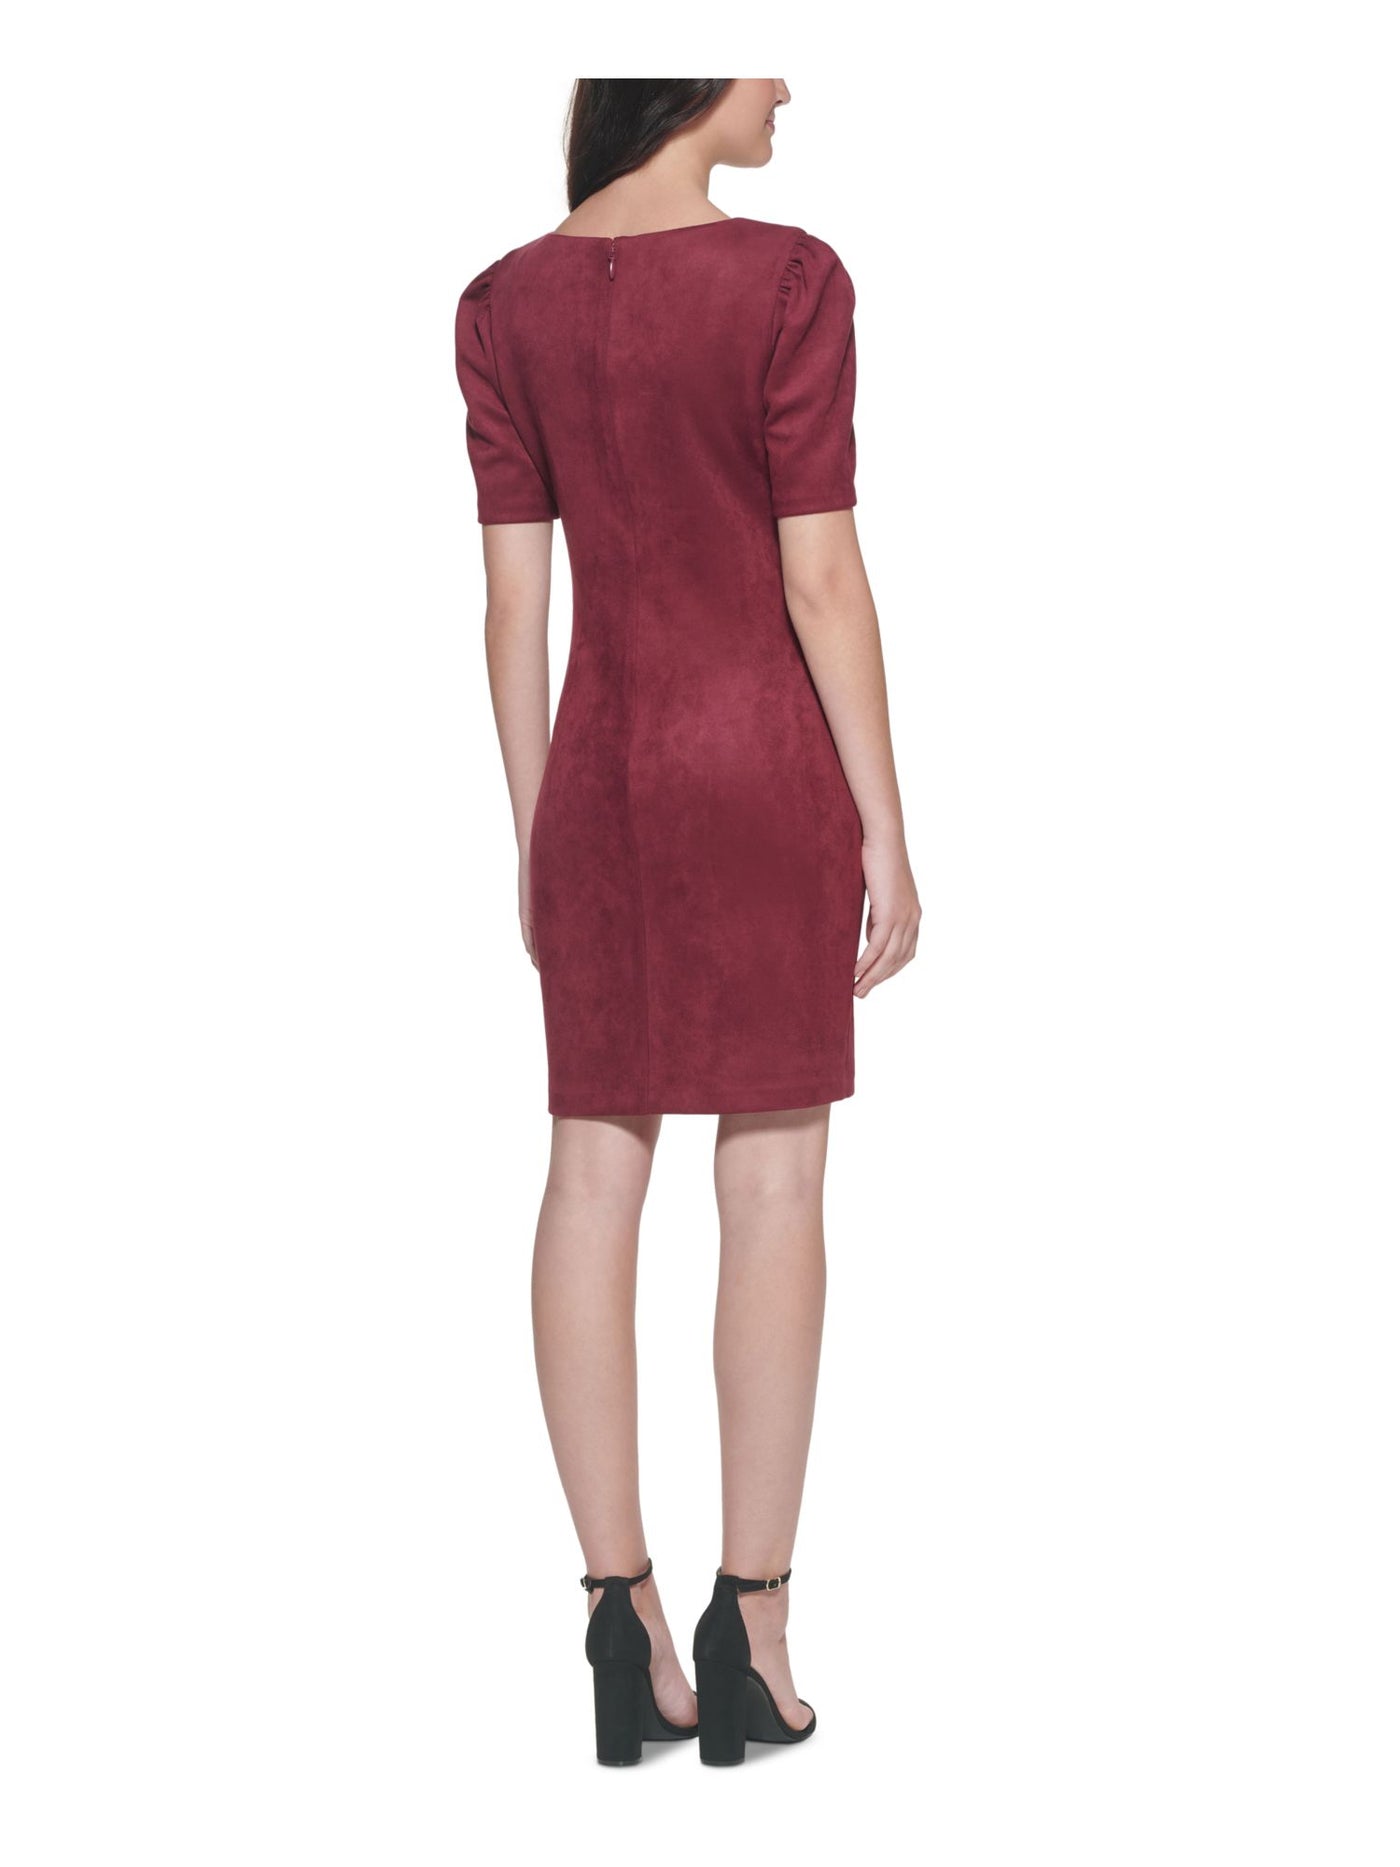 GUESS Womens Maroon Zippered Faux Suede Pouf Sleeve V Neck Above The Knee Cocktail Sheath Dress 0